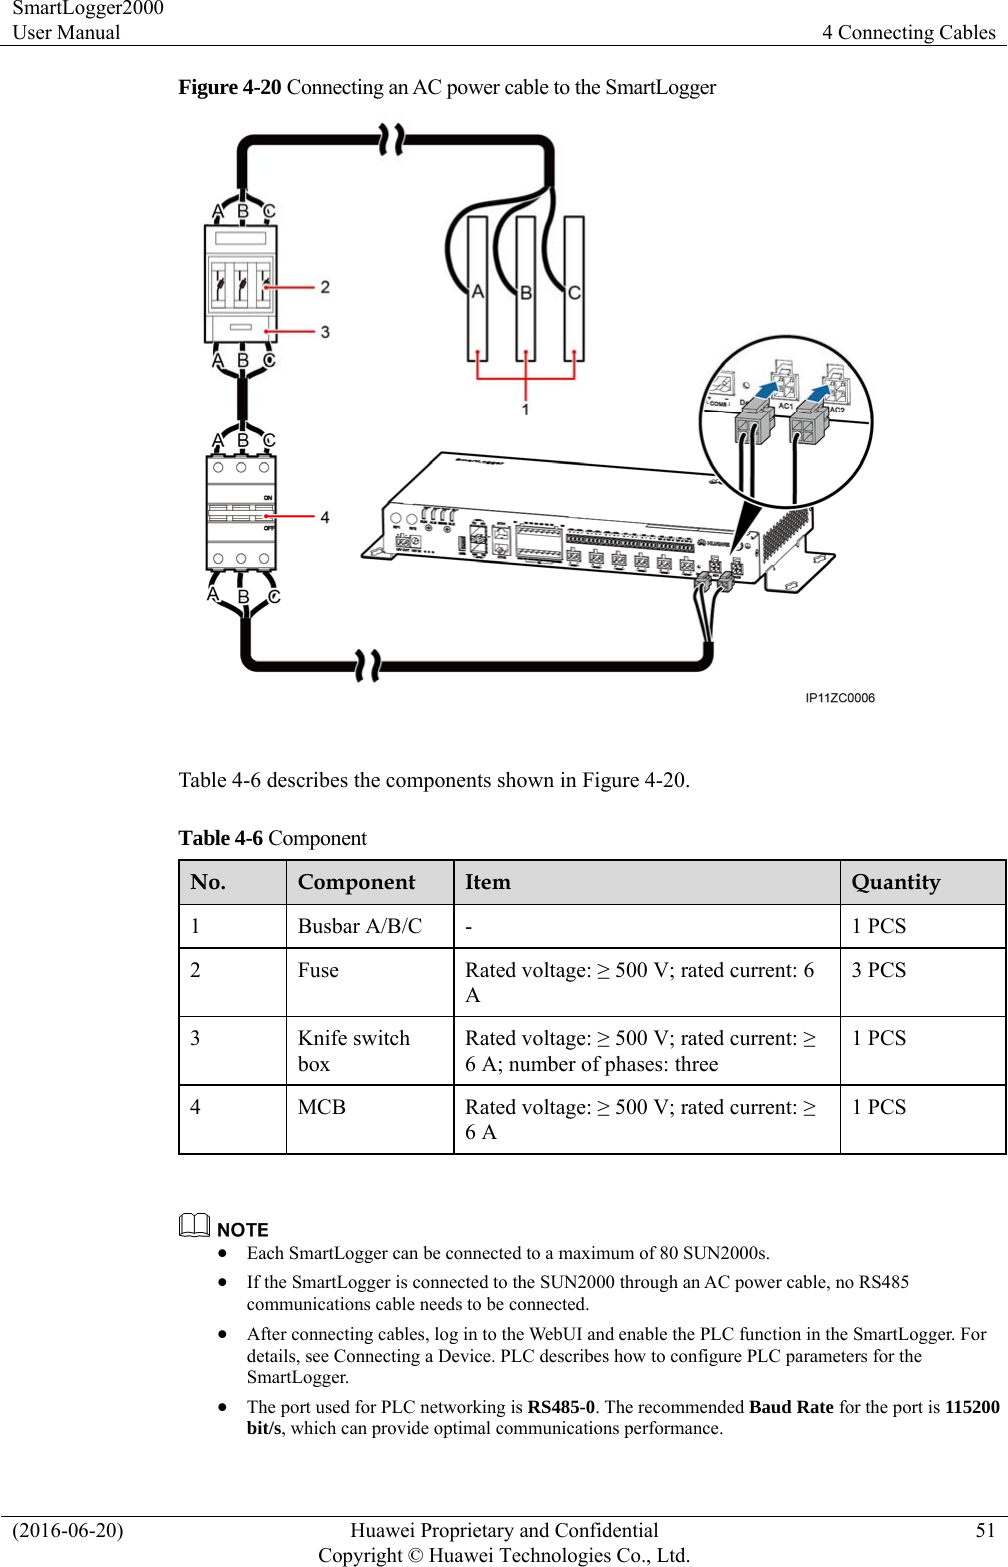 SmartLogger2000 User Manual  4 Connecting Cables (2016-06-20)  Huawei Proprietary and Confidential         Copyright © Huawei Technologies Co., Ltd.51 Figure 4-20 Connecting an AC power cable to the SmartLogger   Table 4-6 describes the components shown in Figure 4-20. Table 4-6 Component No.  Component  Item  Quantity 1  Busbar A/B/C  -  1 PCS 2 Fuse  Rated voltage: ≥ 500 V; rated current: 6 A 3 PCS 3 Knife switch box Rated voltage: ≥ 500 V; rated current: ≥ 6 A; number of phases: three 1 PCS 4 MCB  Rated voltage: ≥ 500 V; rated current: ≥ 6 A 1 PCS    Each SmartLogger can be connected to a maximum of 80 SUN2000s.    If the SmartLogger is connected to the SUN2000 through an AC power cable, no RS485 communications cable needs to be connected.    After connecting cables, log in to the WebUI and enable the PLC function in the SmartLogger. For details, see Connecting a Device. PLC describes how to configure PLC parameters for the SmartLogger.  The port used for PLC networking is RS485-0. The recommended Baud Rate for the port is 115200 bit/s, which can provide optimal communications performance. 